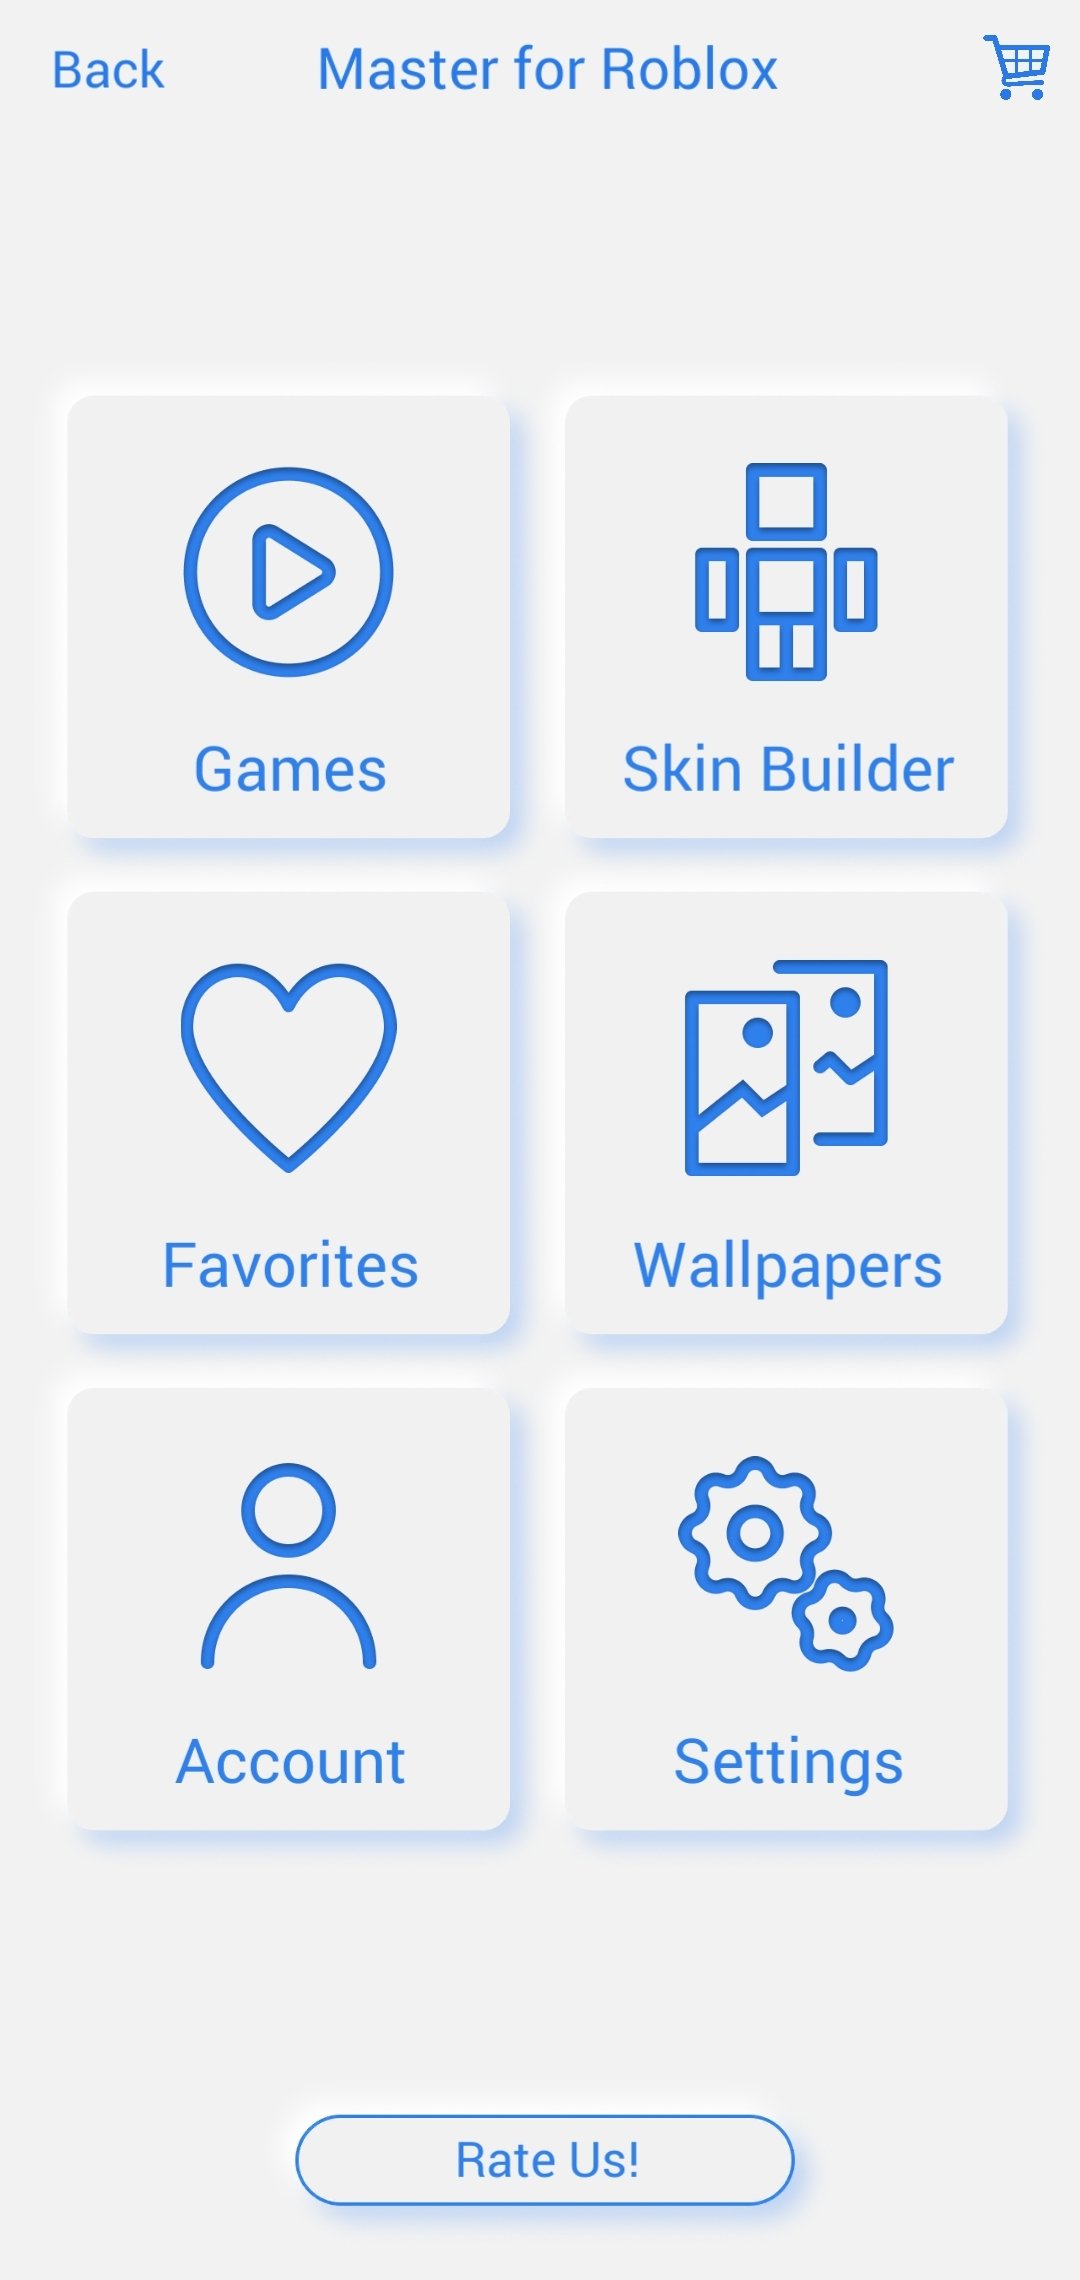 MOD-MASTER for Roblox APK for Android Download